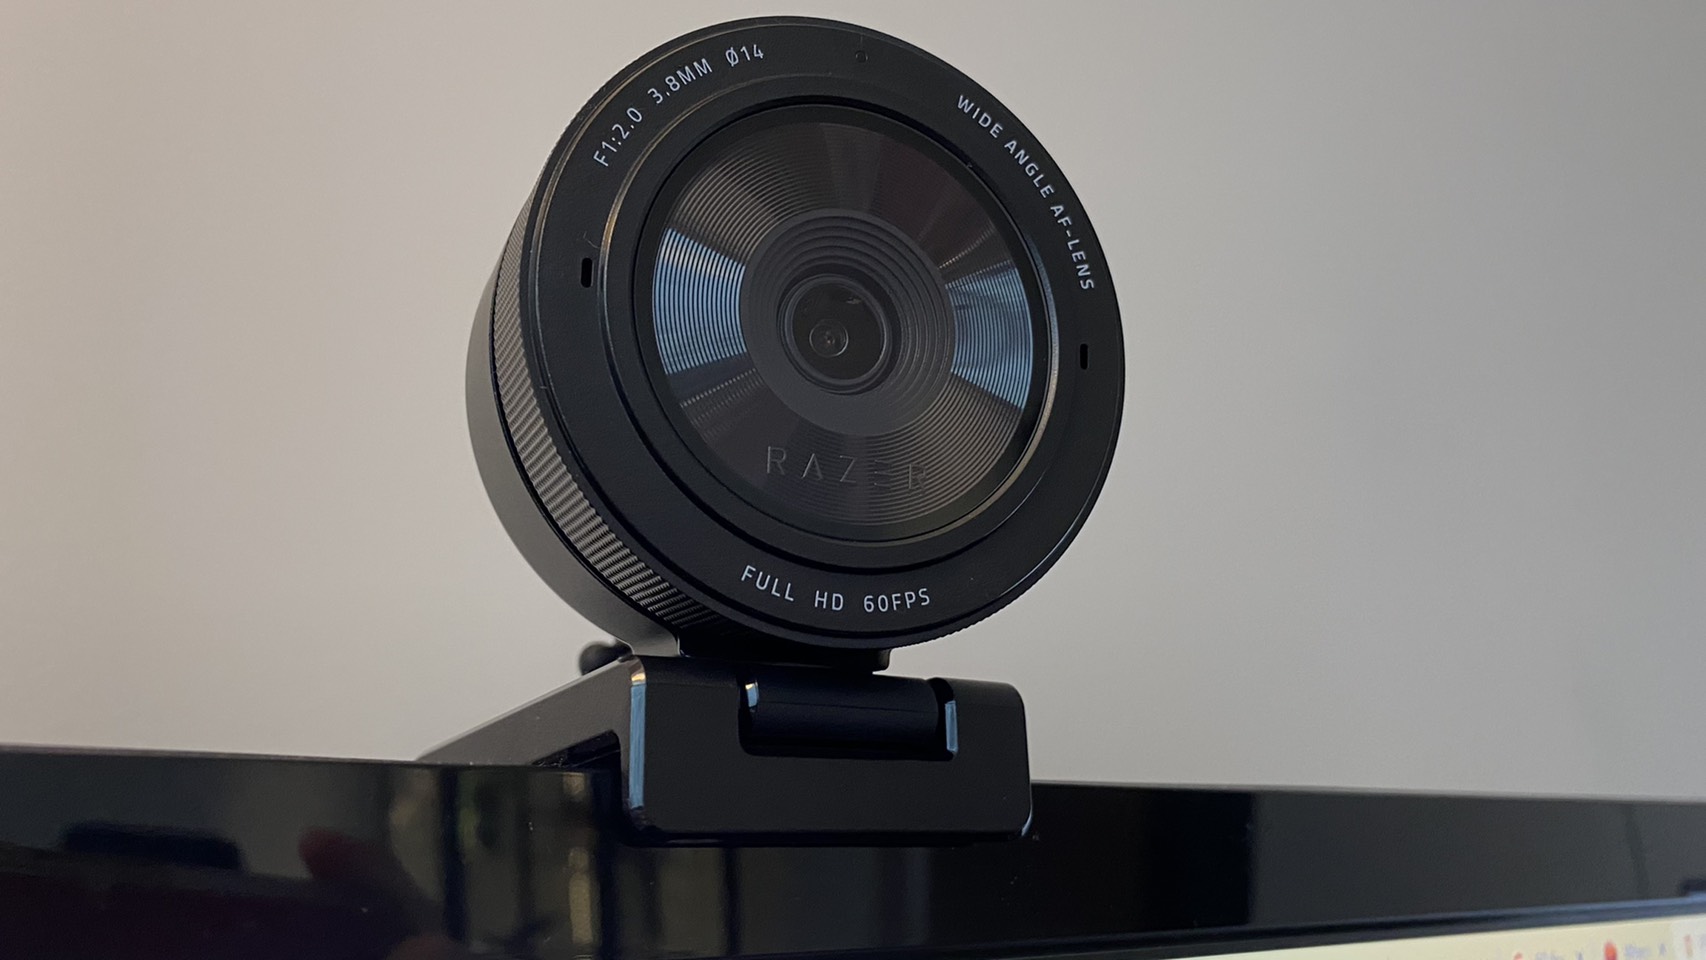 Review: Razer Kiyo Pro  Look Good In The Home Office